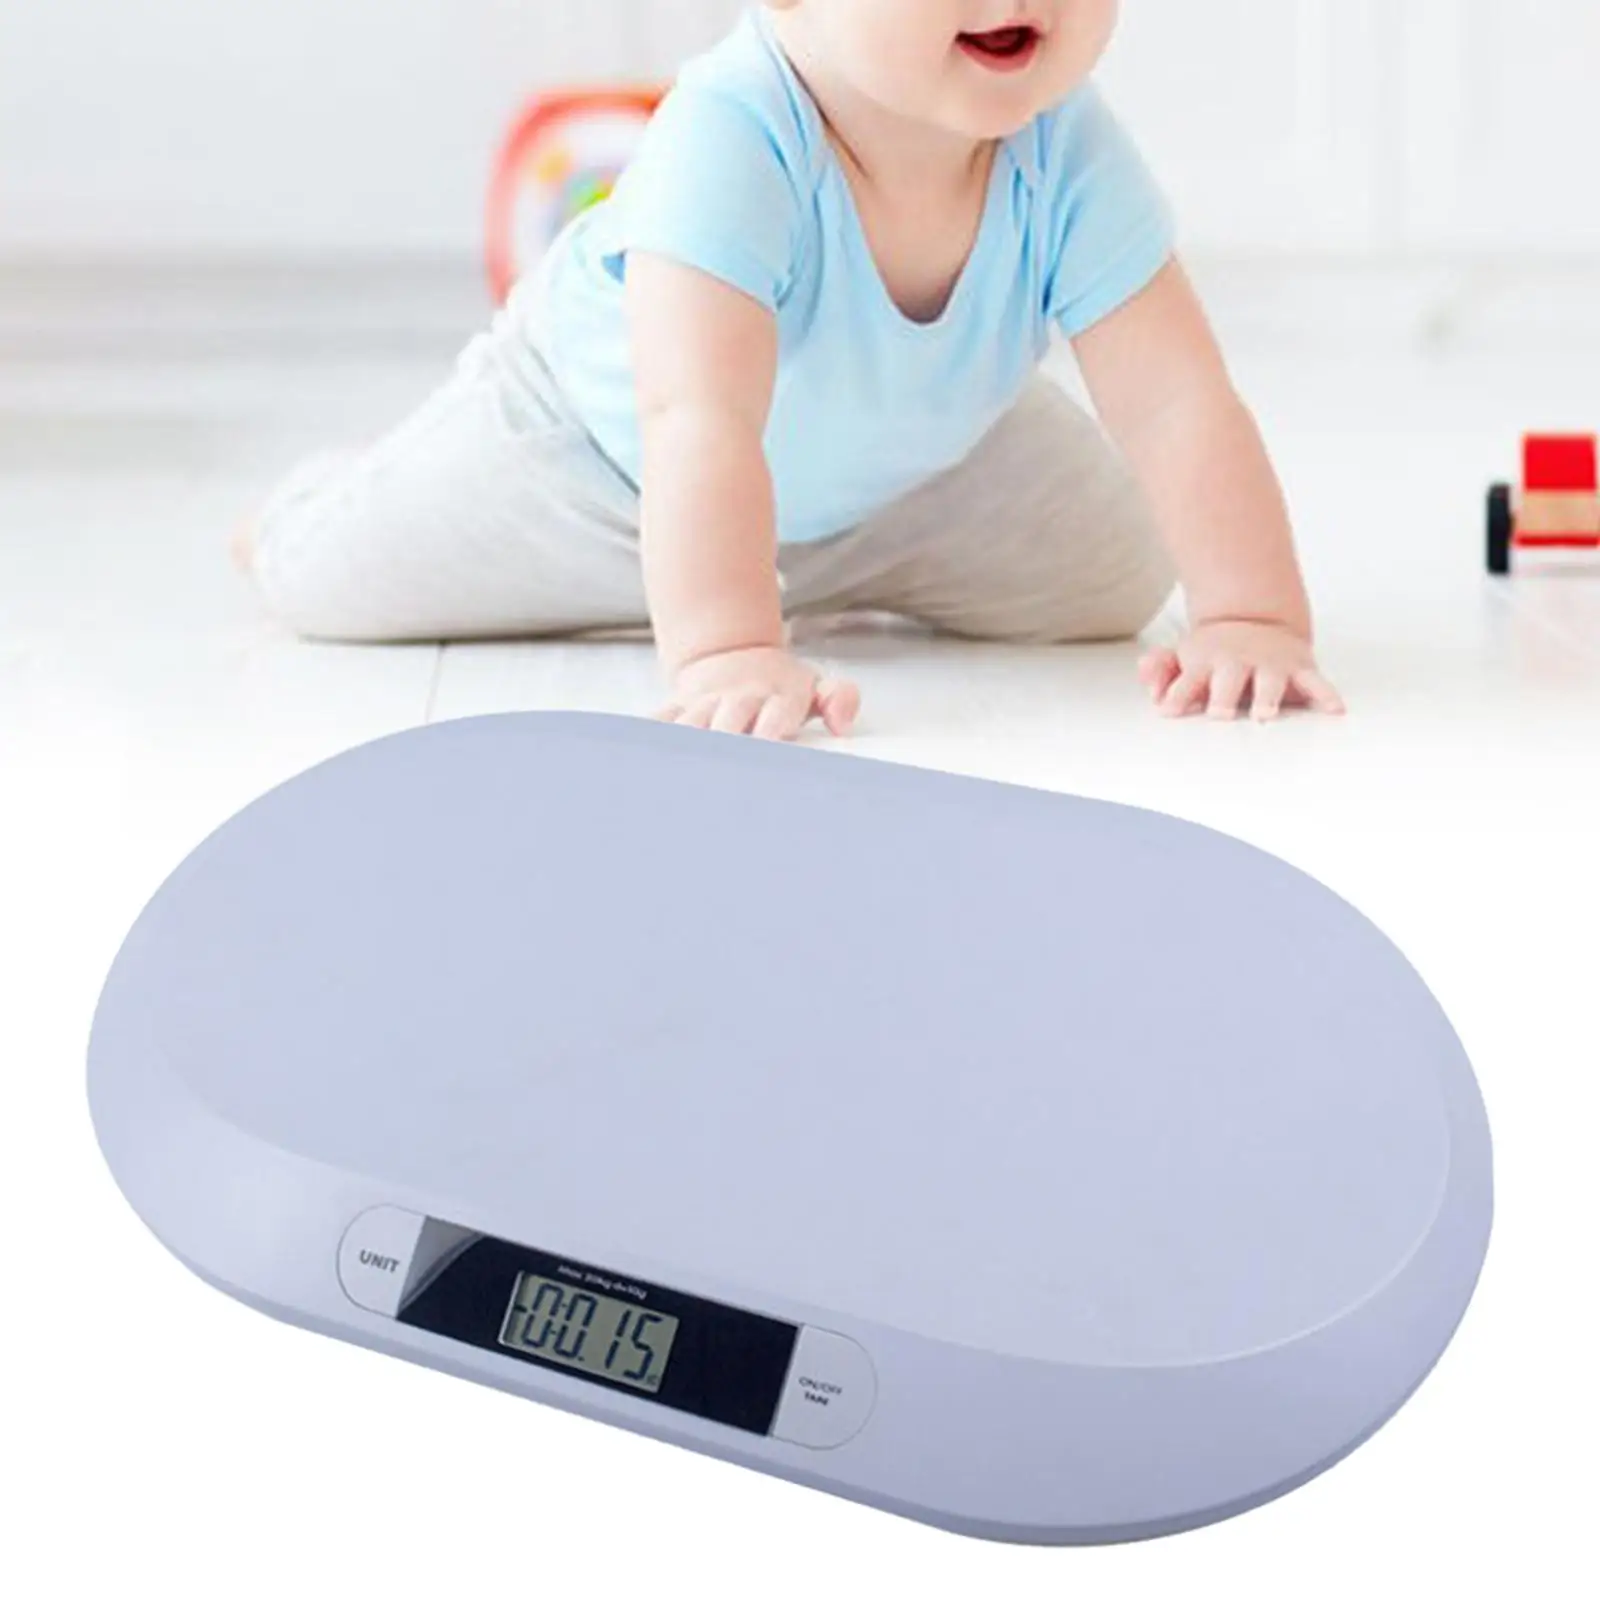 Infant Scale Multifunction 44.1lb Capacity for Toddlers Newborns Puppy